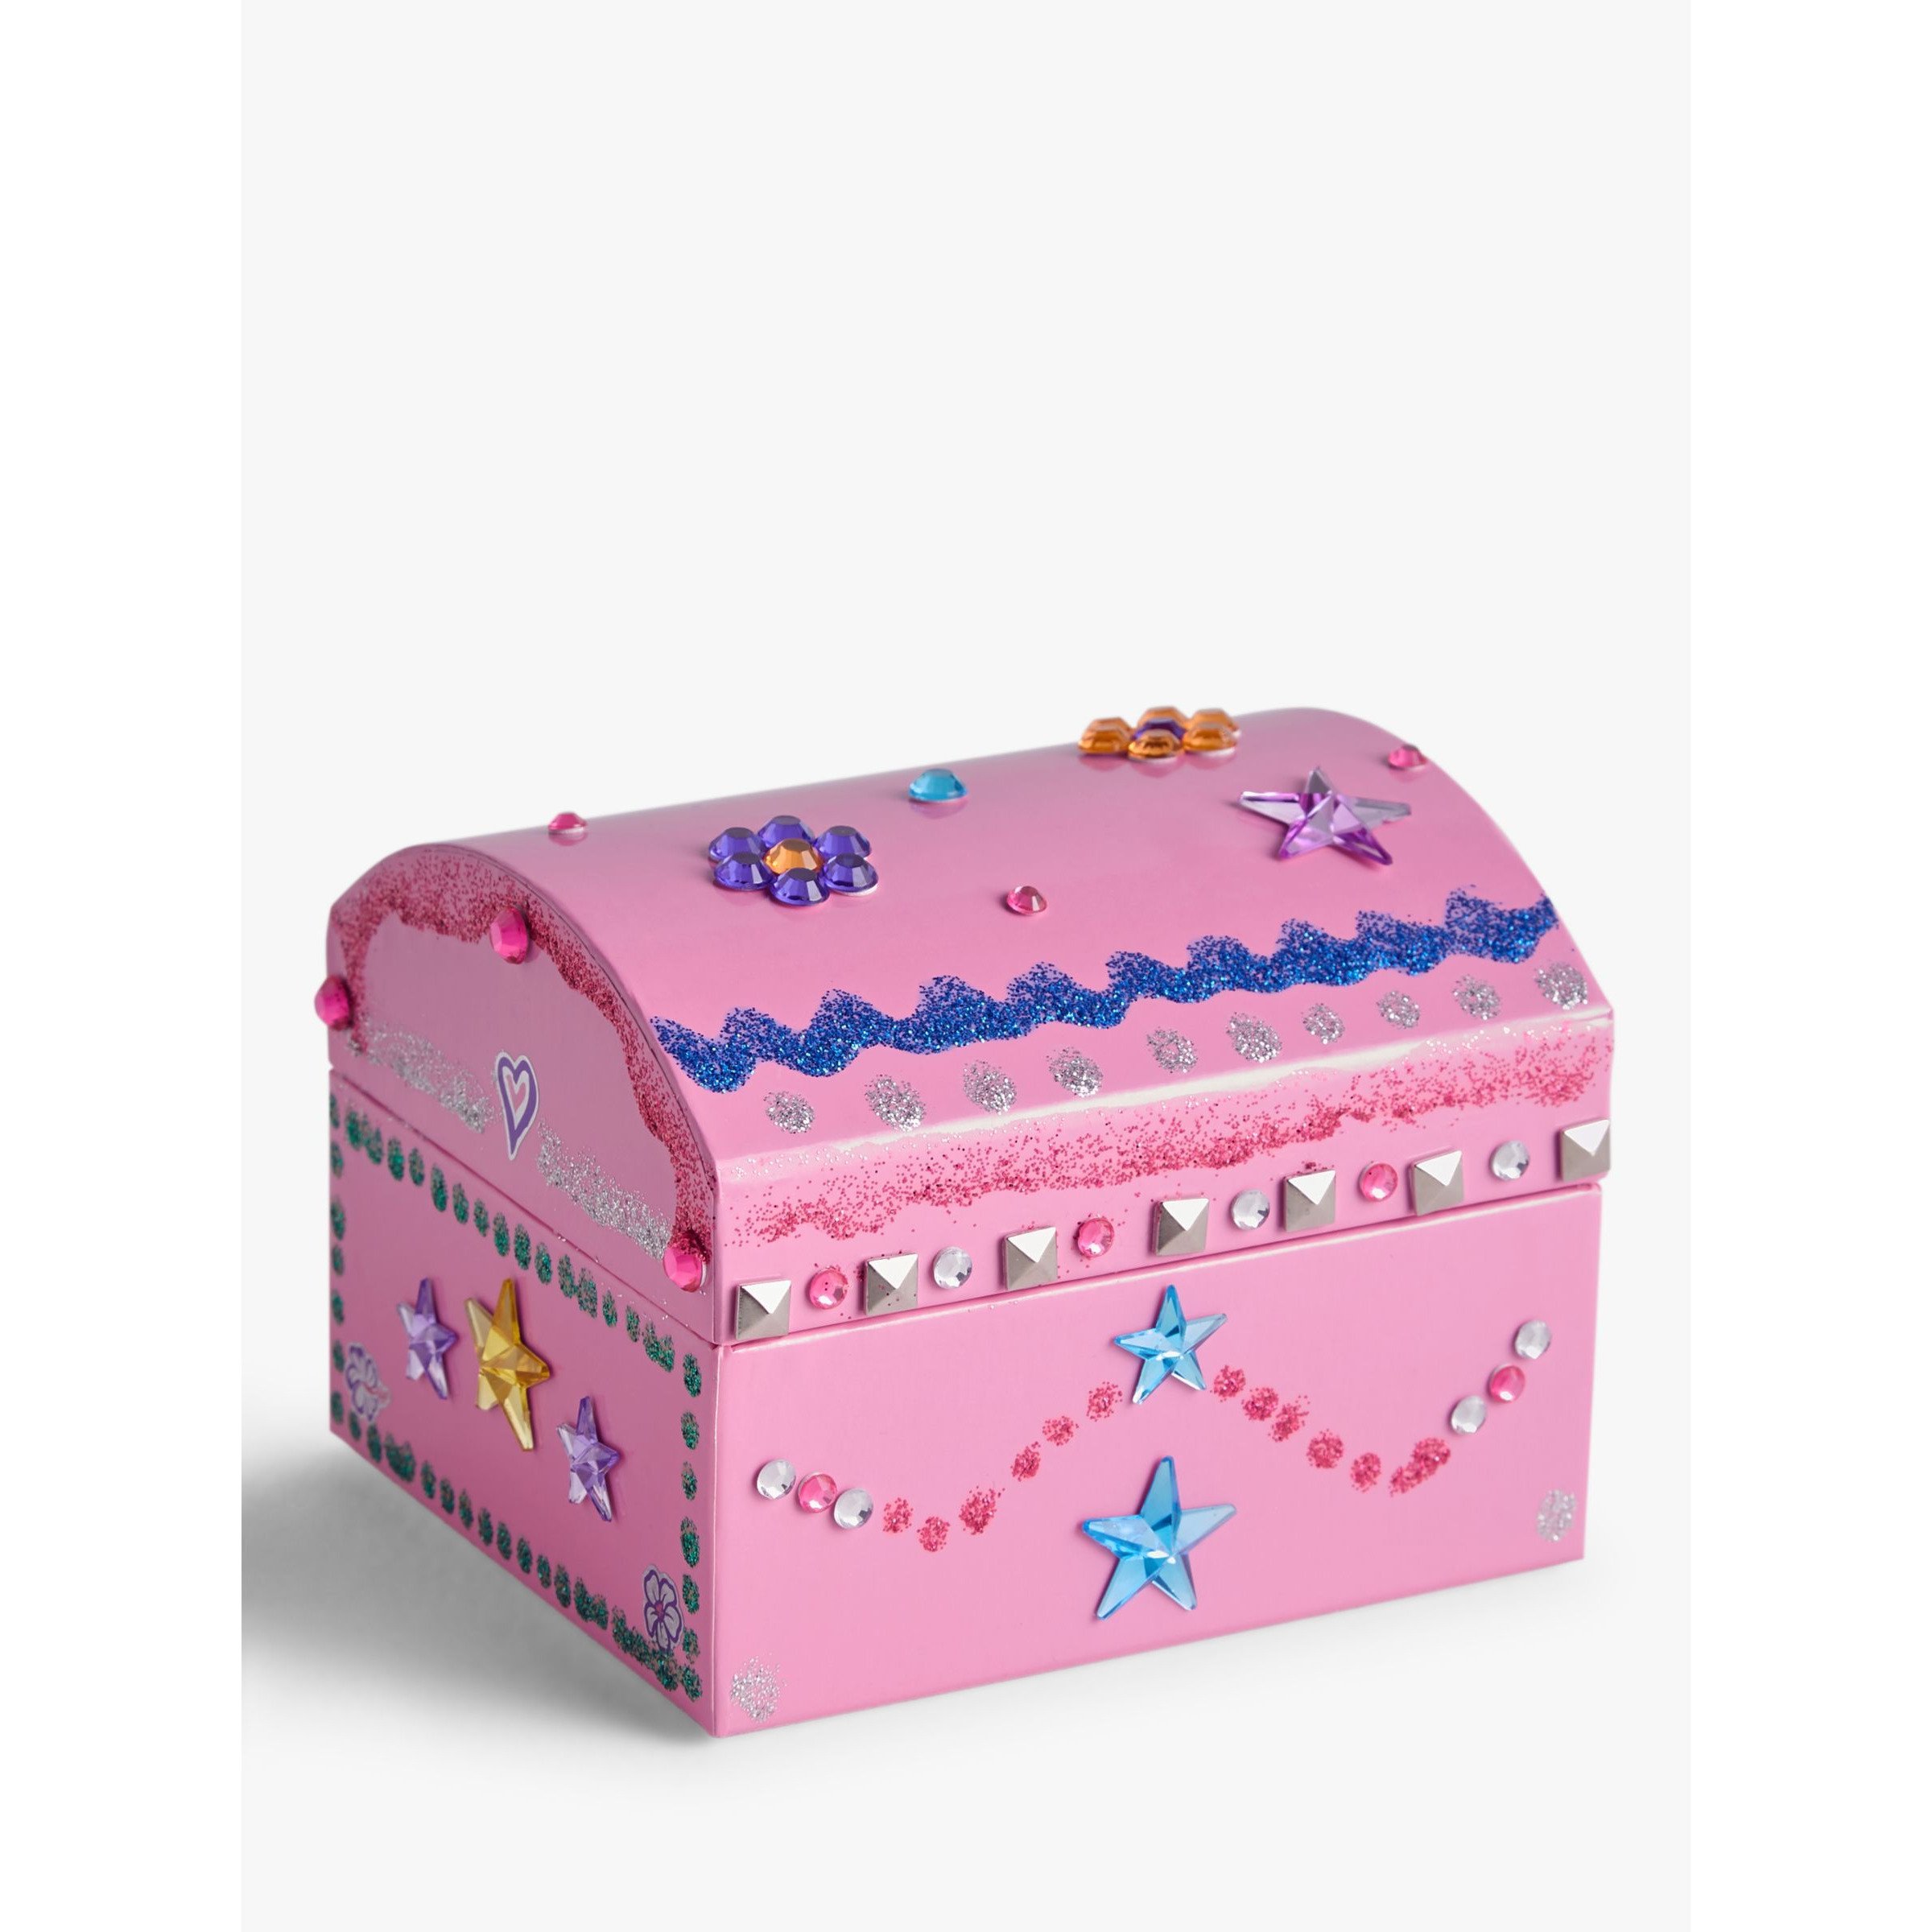 John Lewis Decorate Your Own Jewellery Box - image 1